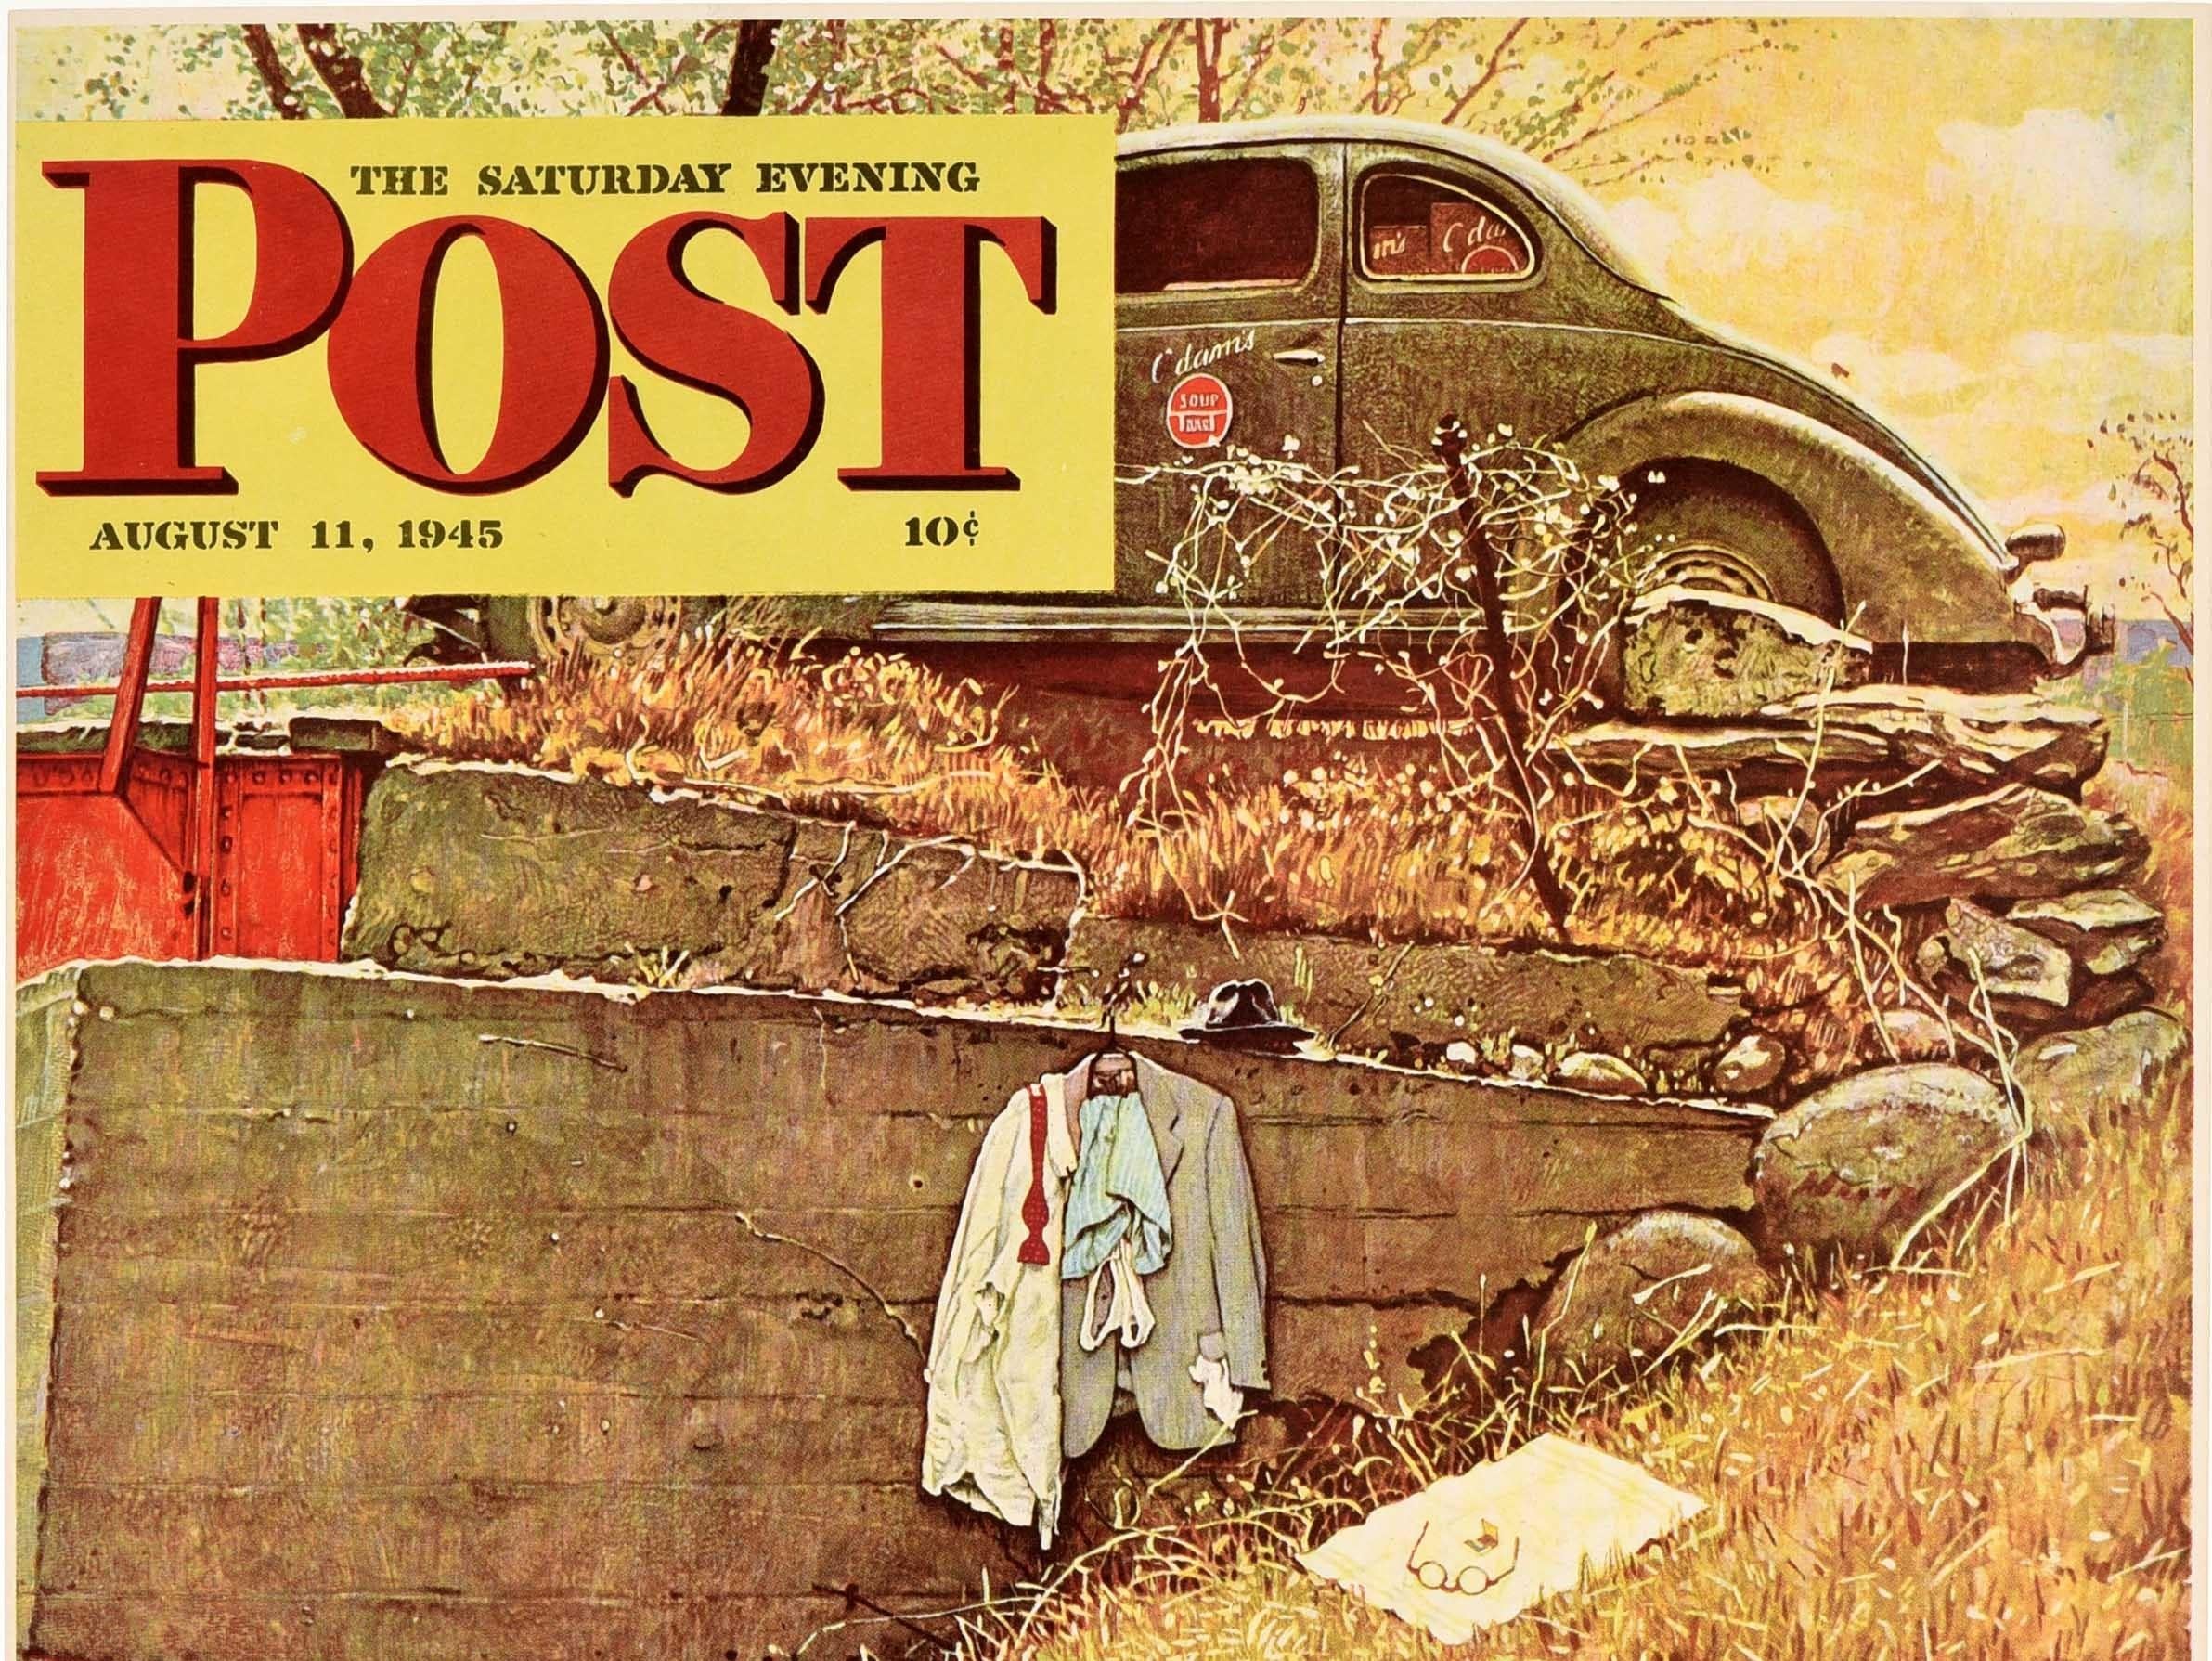 Original Vintage Poster For The Saturday Evening Post Swimming Hole Cover Art - Print by Norman Rockwell